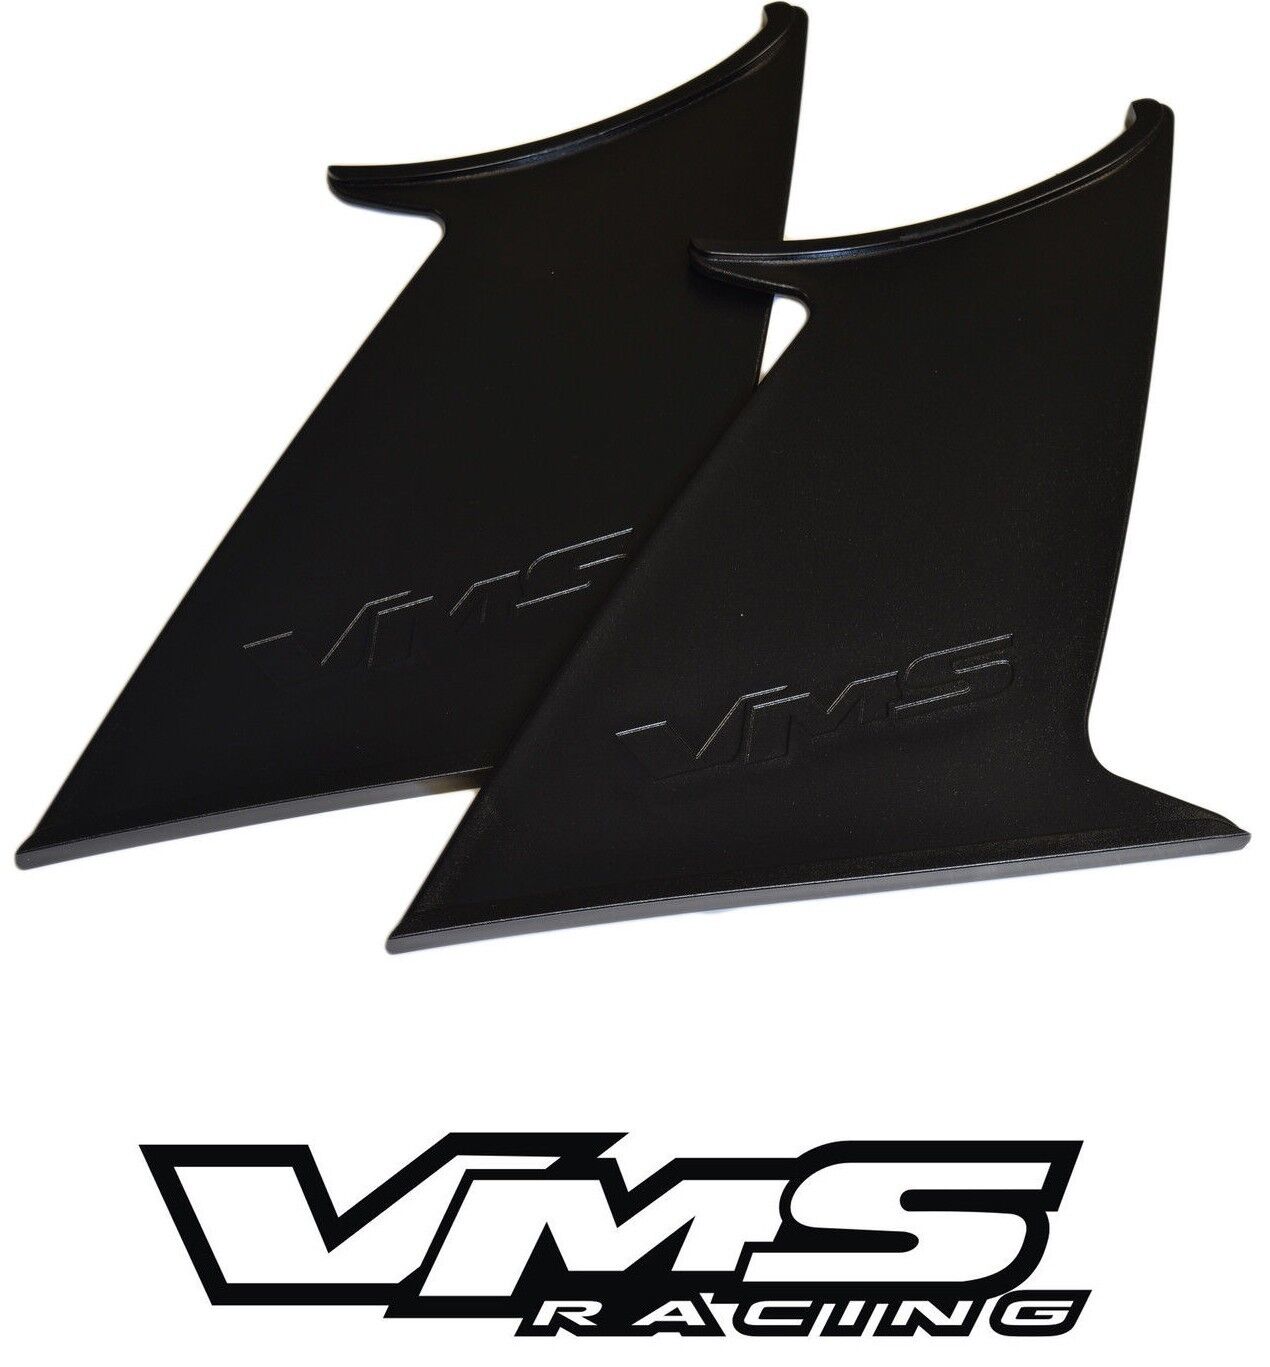 2 (TWO) VMS RACING REAR WING SPOILER SUPPORT STABILIZER for 15-17 SUBARU WRX STI